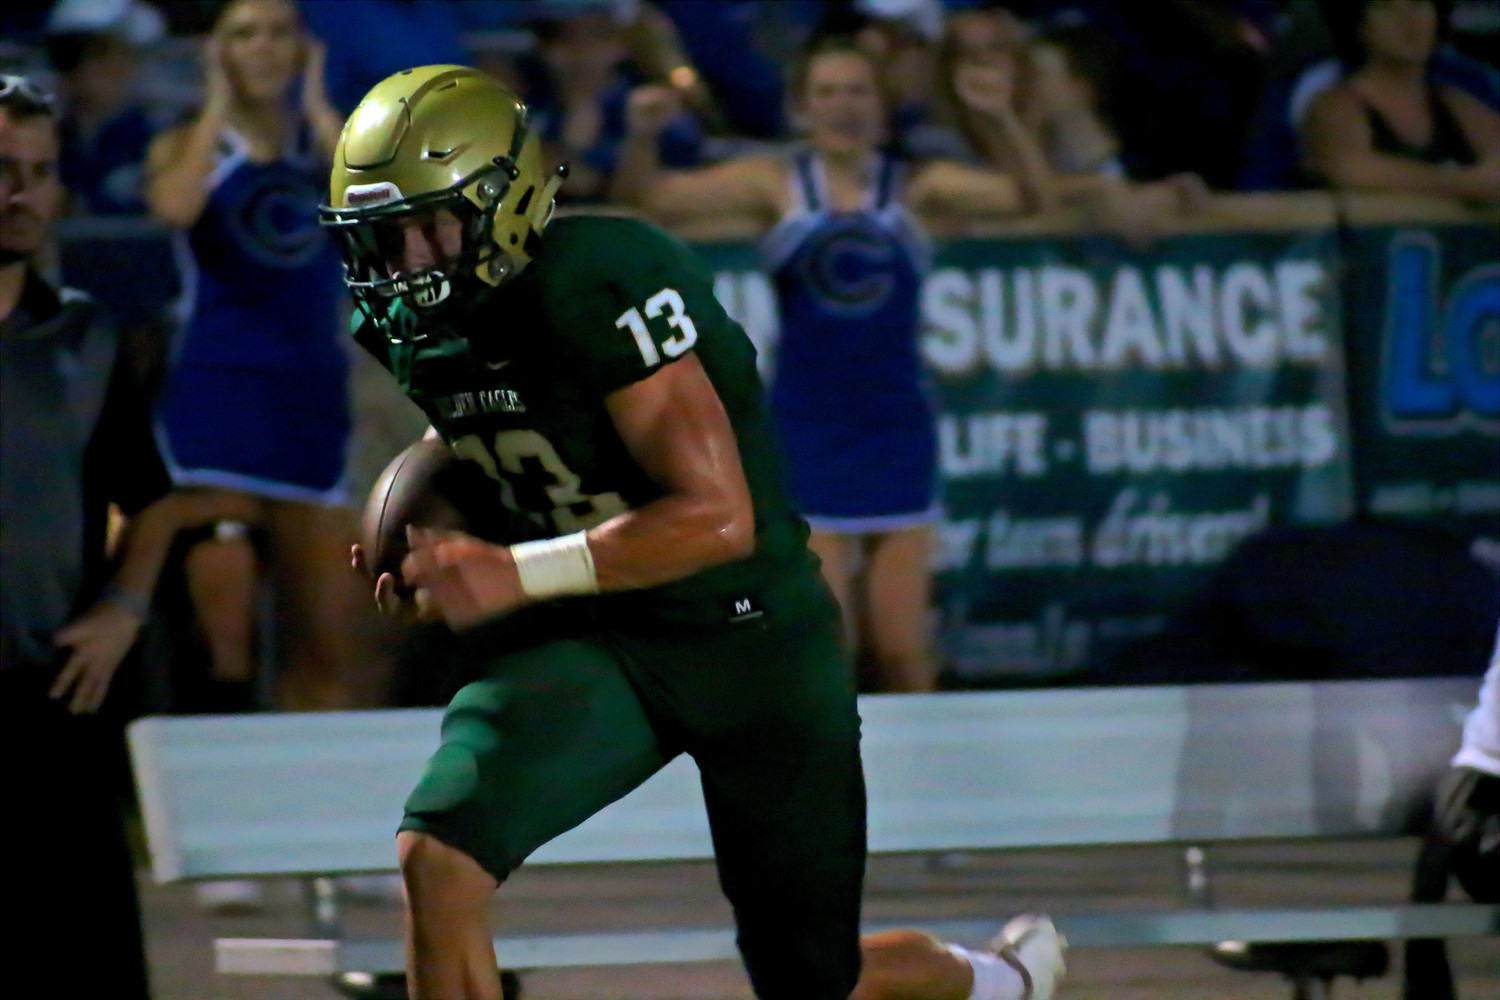 Staff photos by Randy Lefko
Fleming Island High senior linebacker and utility player Jackson Bull returns after he scored a critical touchdown to put Fleming Island up 14-7.